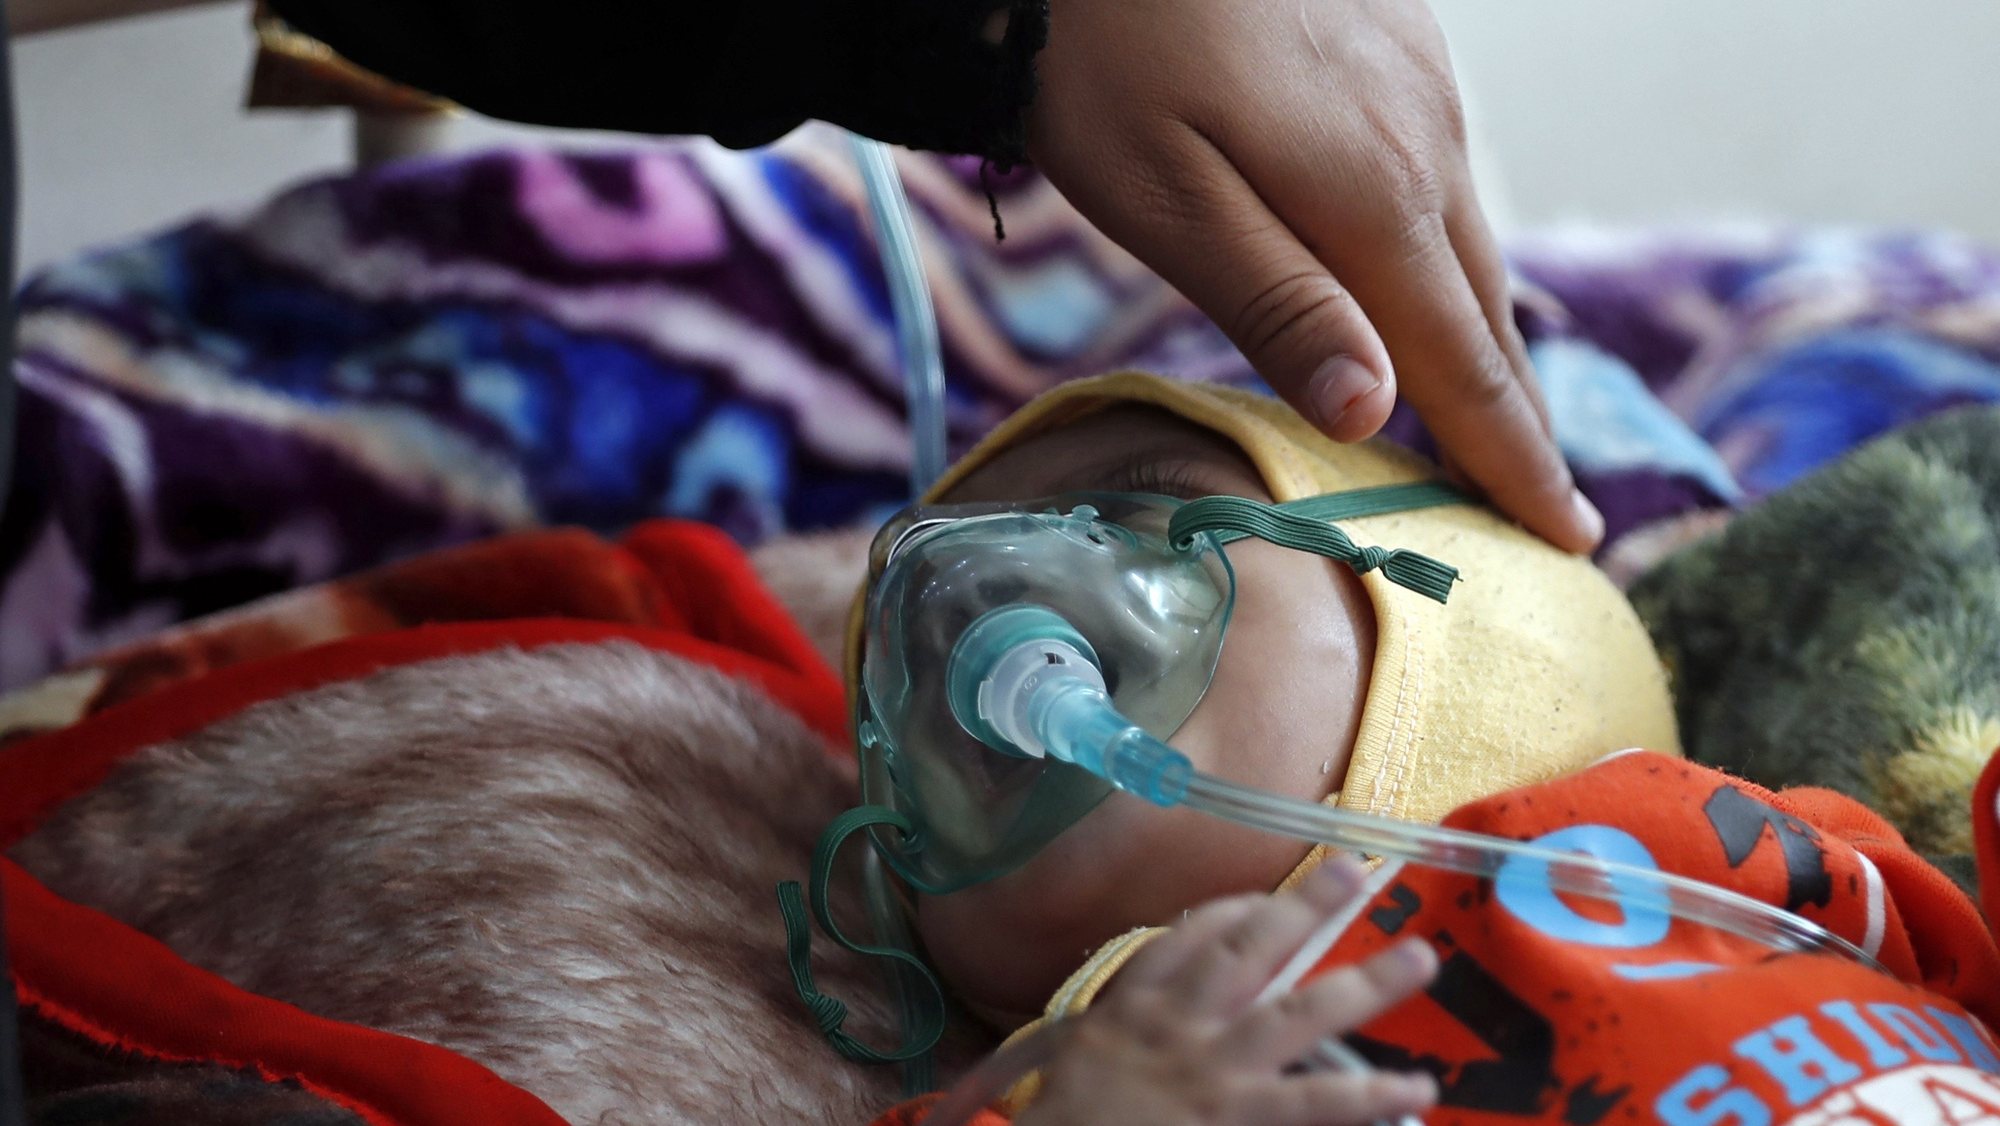 epa08033744 A woman takes care of her patient child receiving treatment at a hospital, Sanaa, Yemen, 19 November 2019 (issued 29 November 2019). According to reports, at least 12 million children in war-ridden Yemen need urgent humanitarian aid as a new wave of epidemic diseases, including dengue fever and malaria, have been spreading rapidly across the Arab country since the beginning of the escalating conflict in 2015.  EPA/YAHYA ARHAB